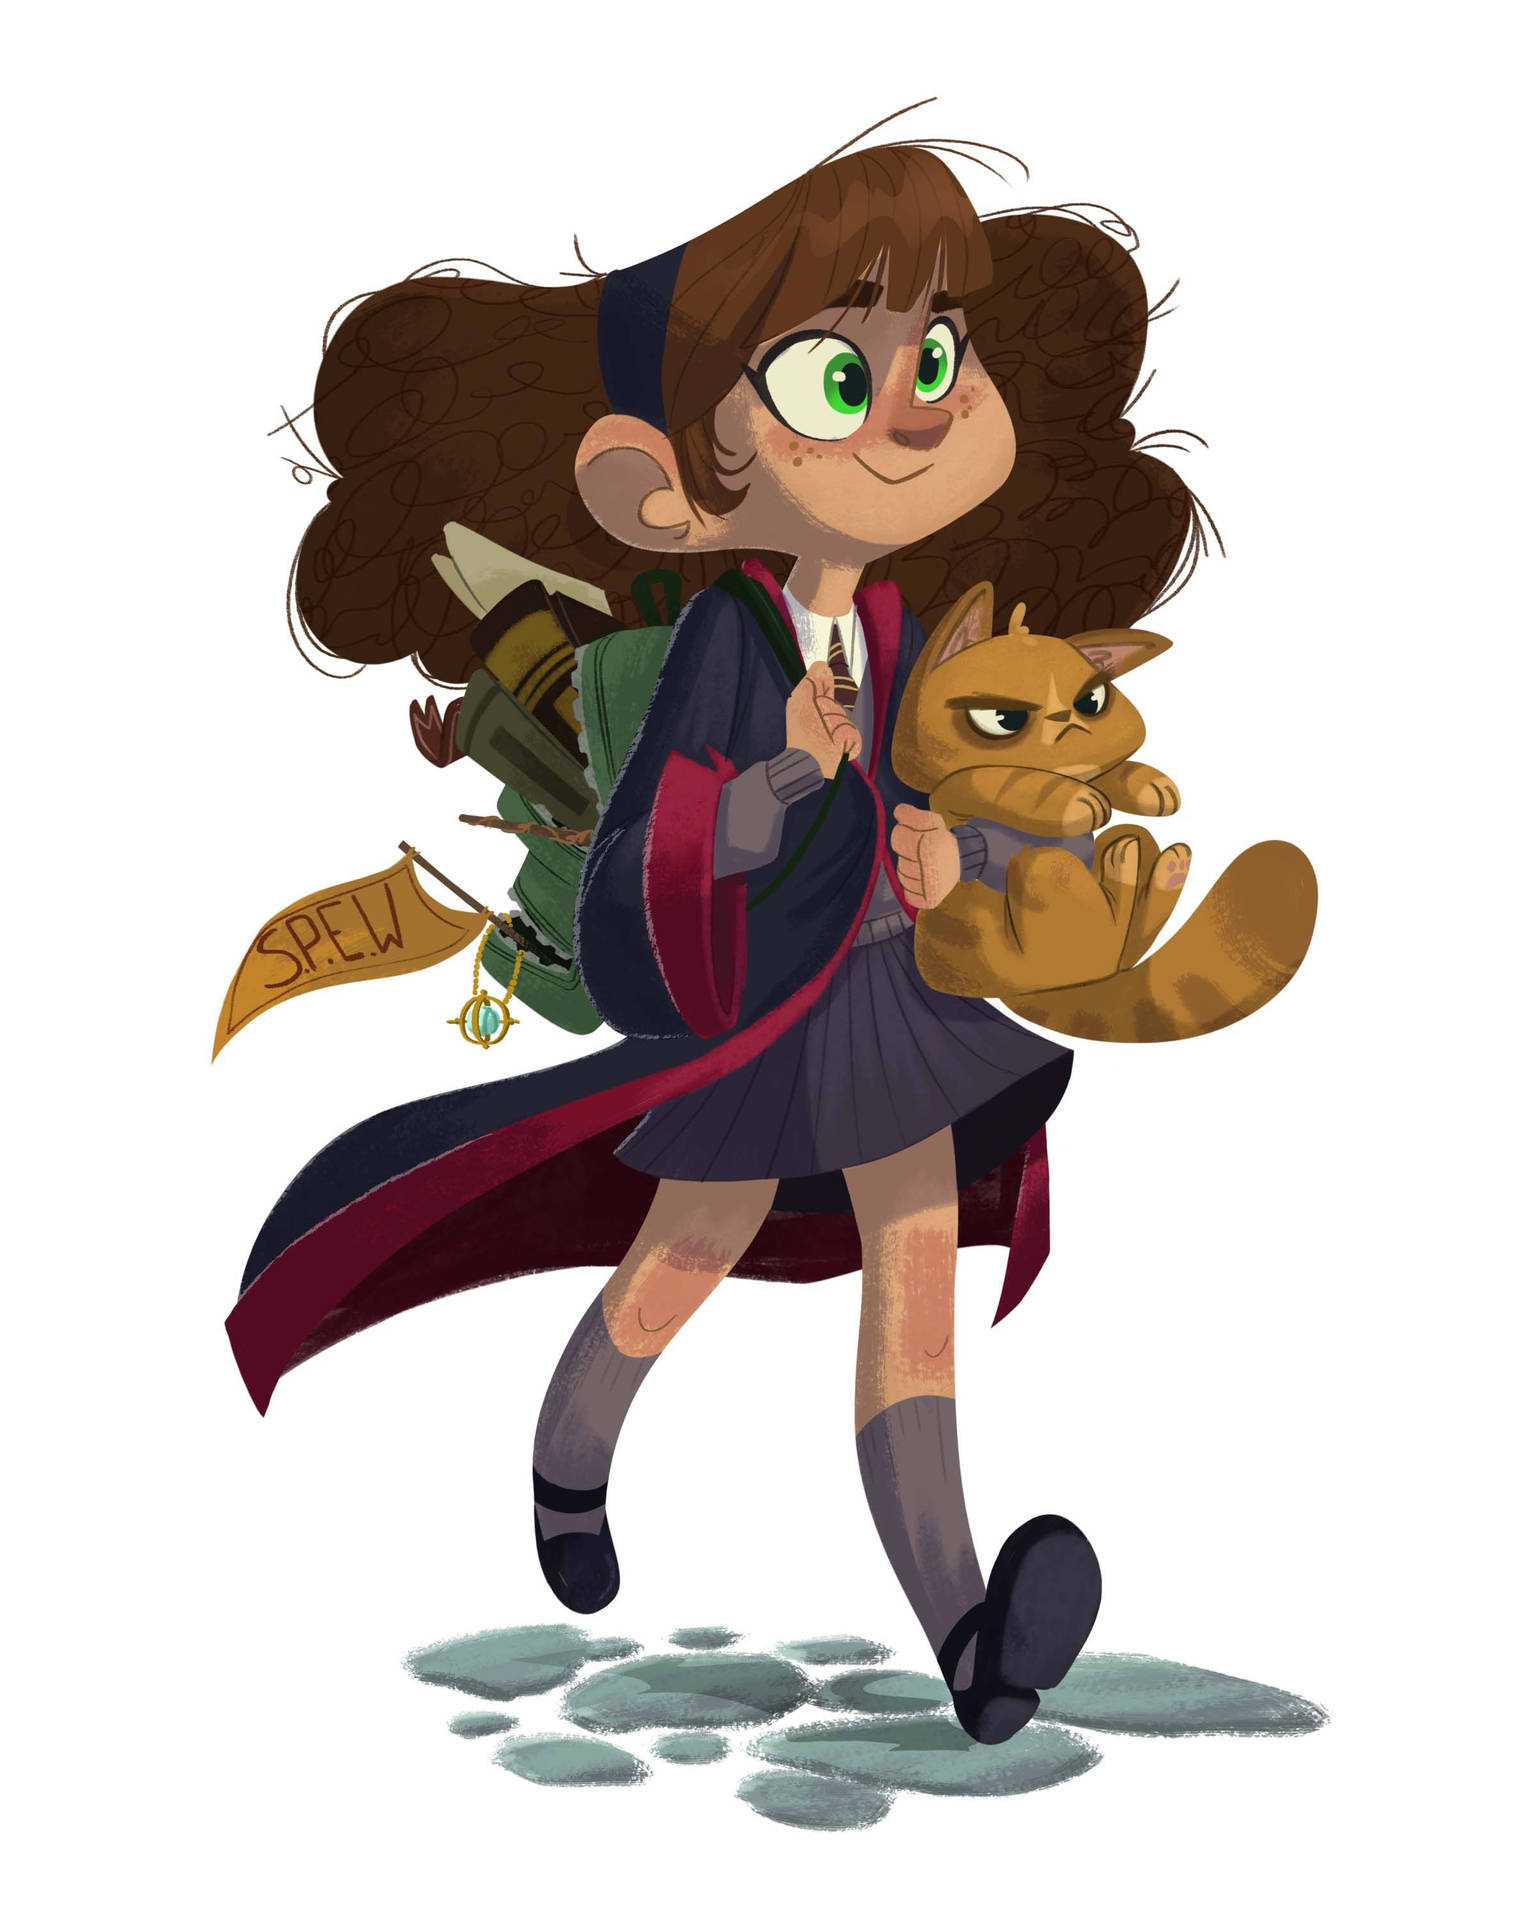 Hermione Granger Is Full Of Energy, Intelligence And Sass! Background